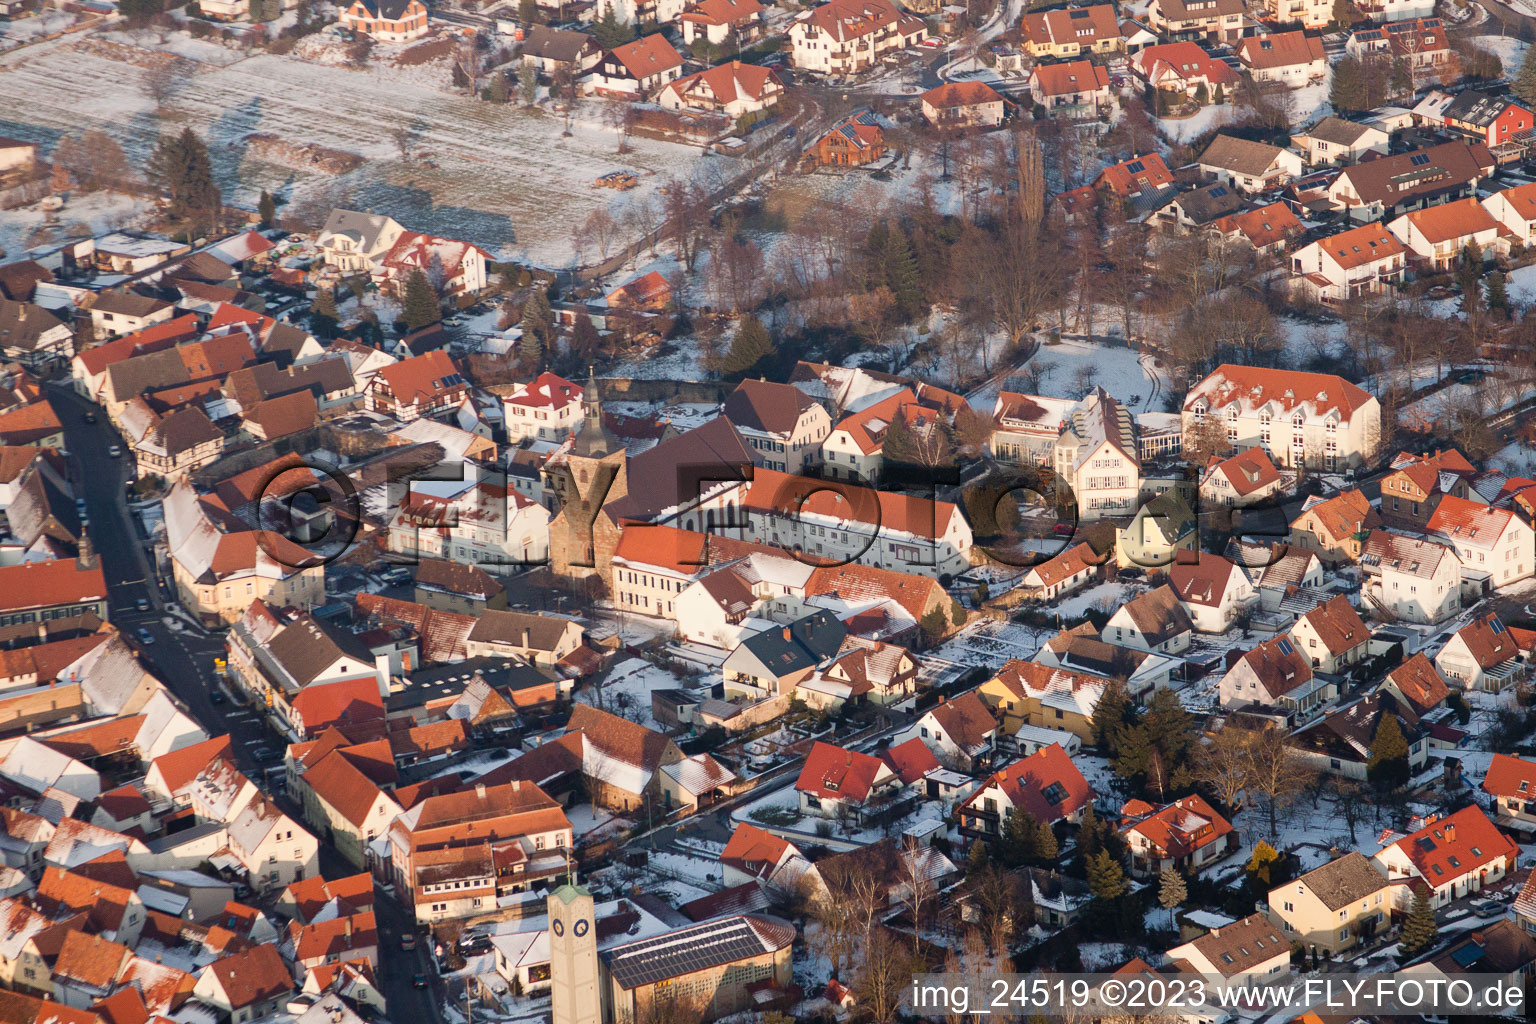 Winter snow-covered village in Klingenmünster in the state Rhineland-Palatinate, Germany